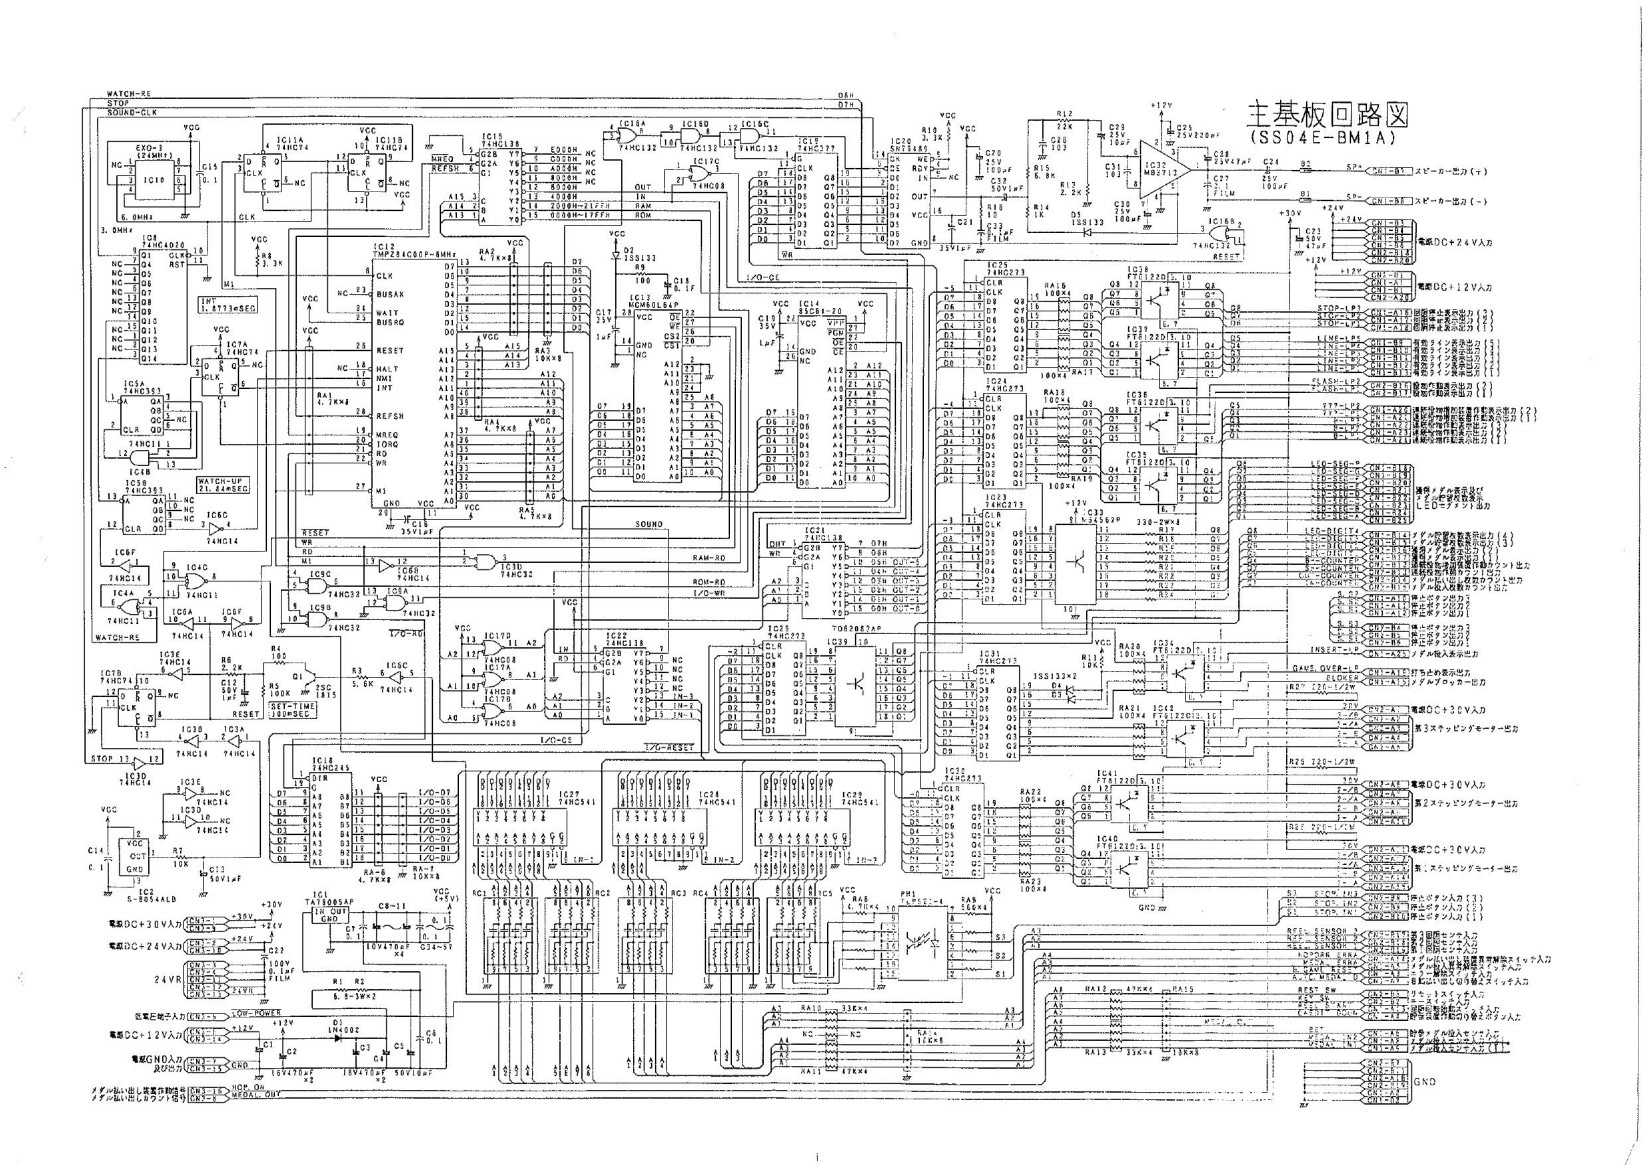 Main PCB (without sub board)